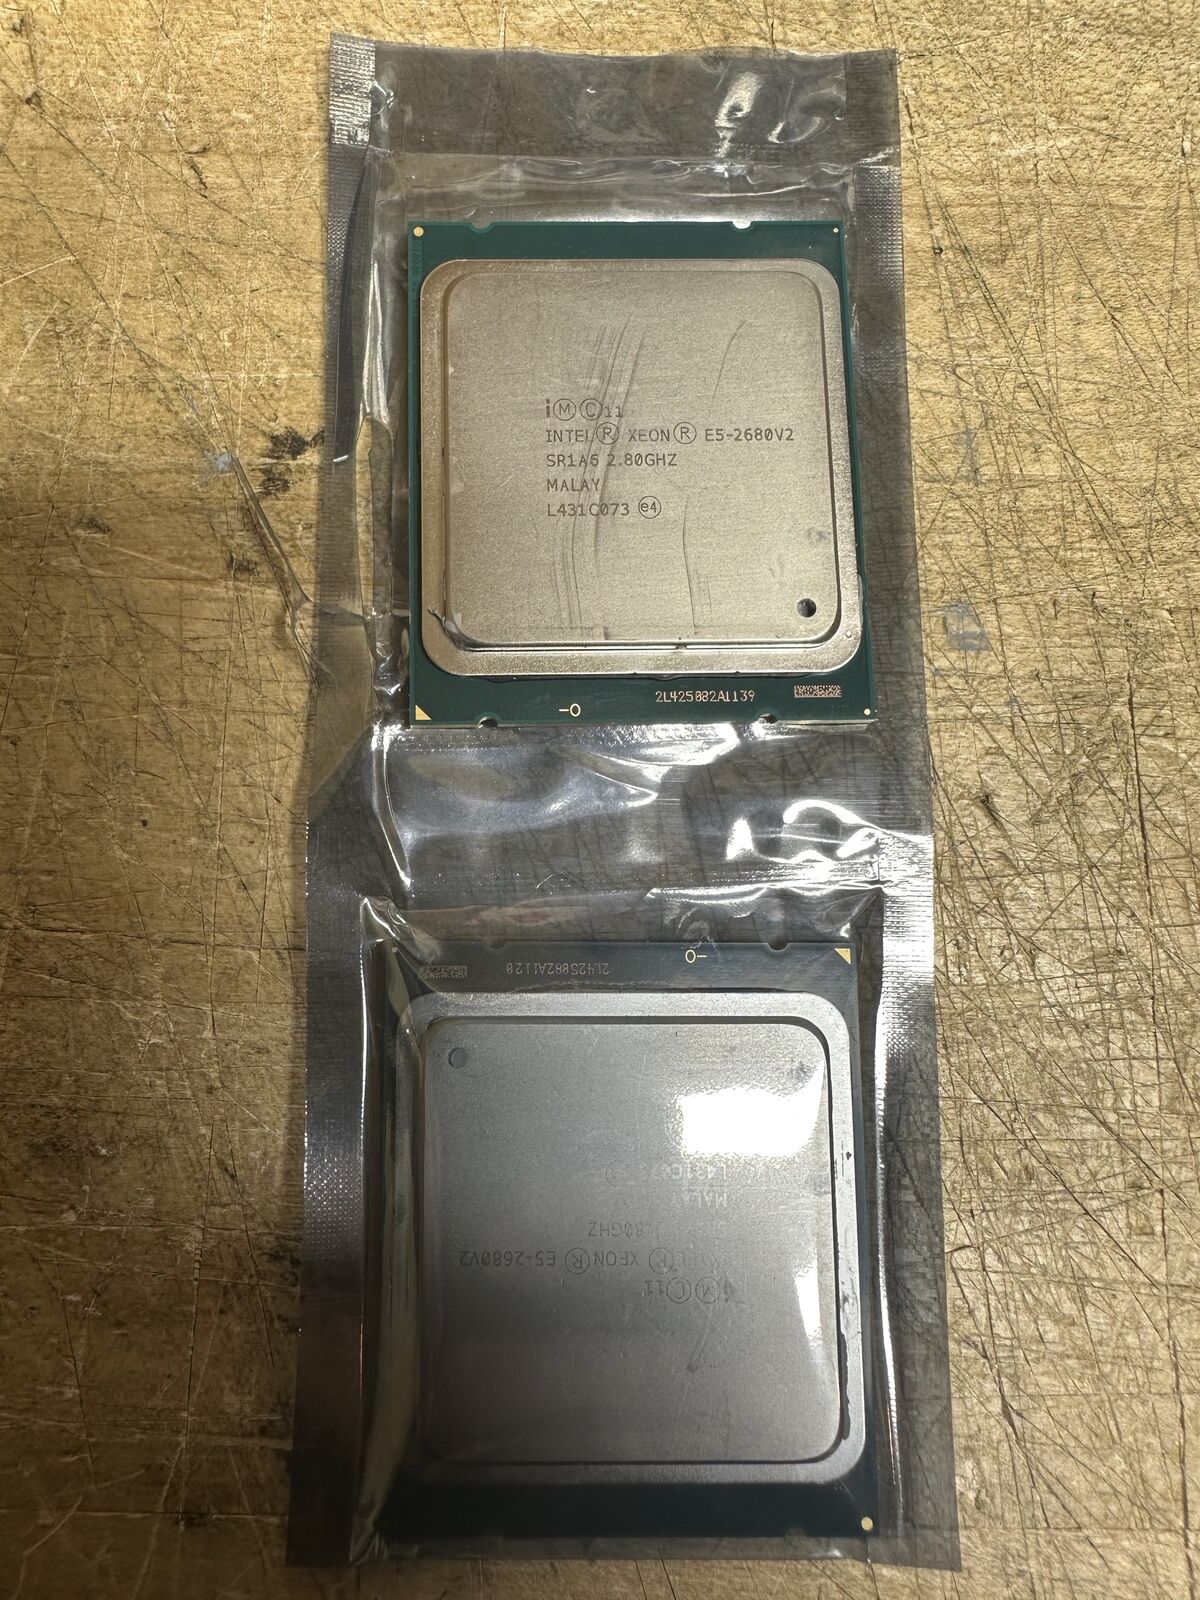 Lot of ONE MATCHED PAIR OF INTEL XEON e5-2680 V2 . 2.80GHz 